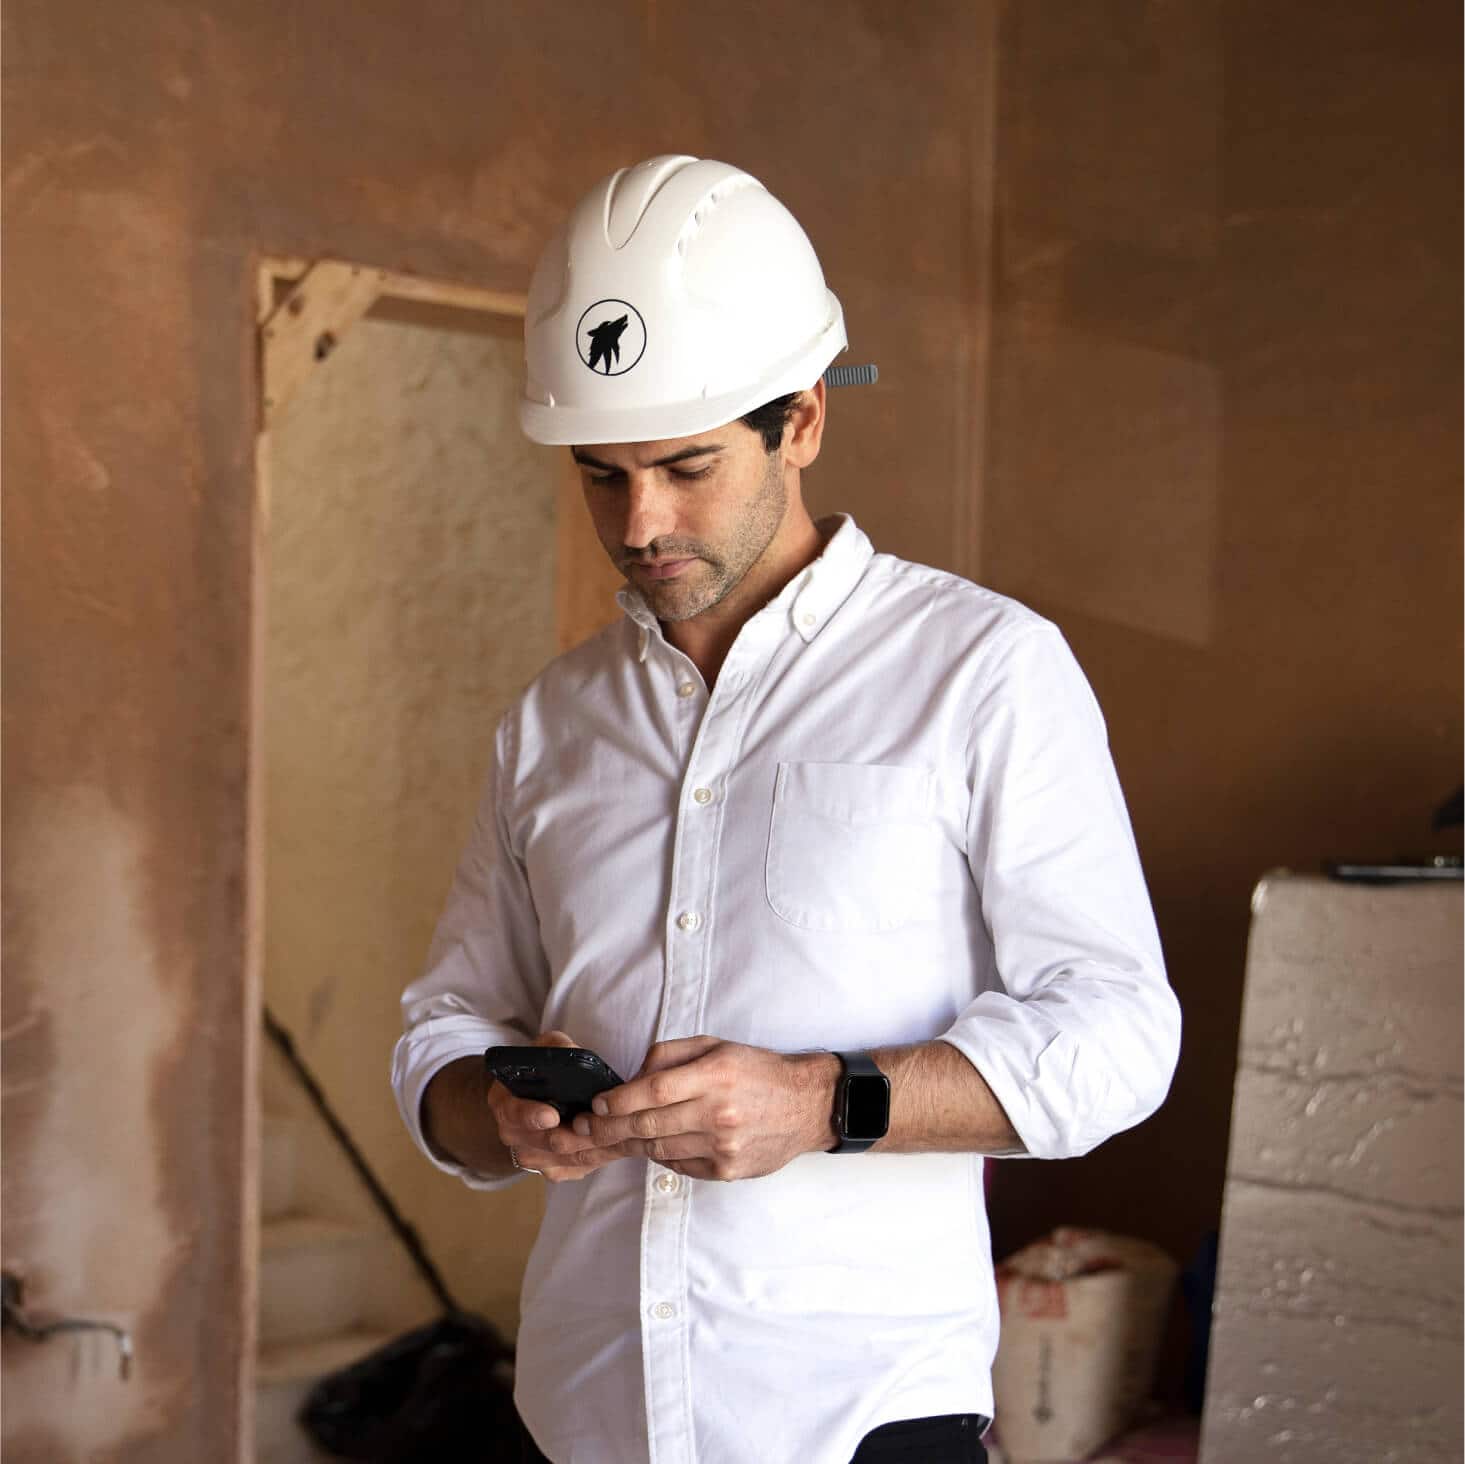 A carpenter on a building site enters the costs of materials into job management software on their mobile device.